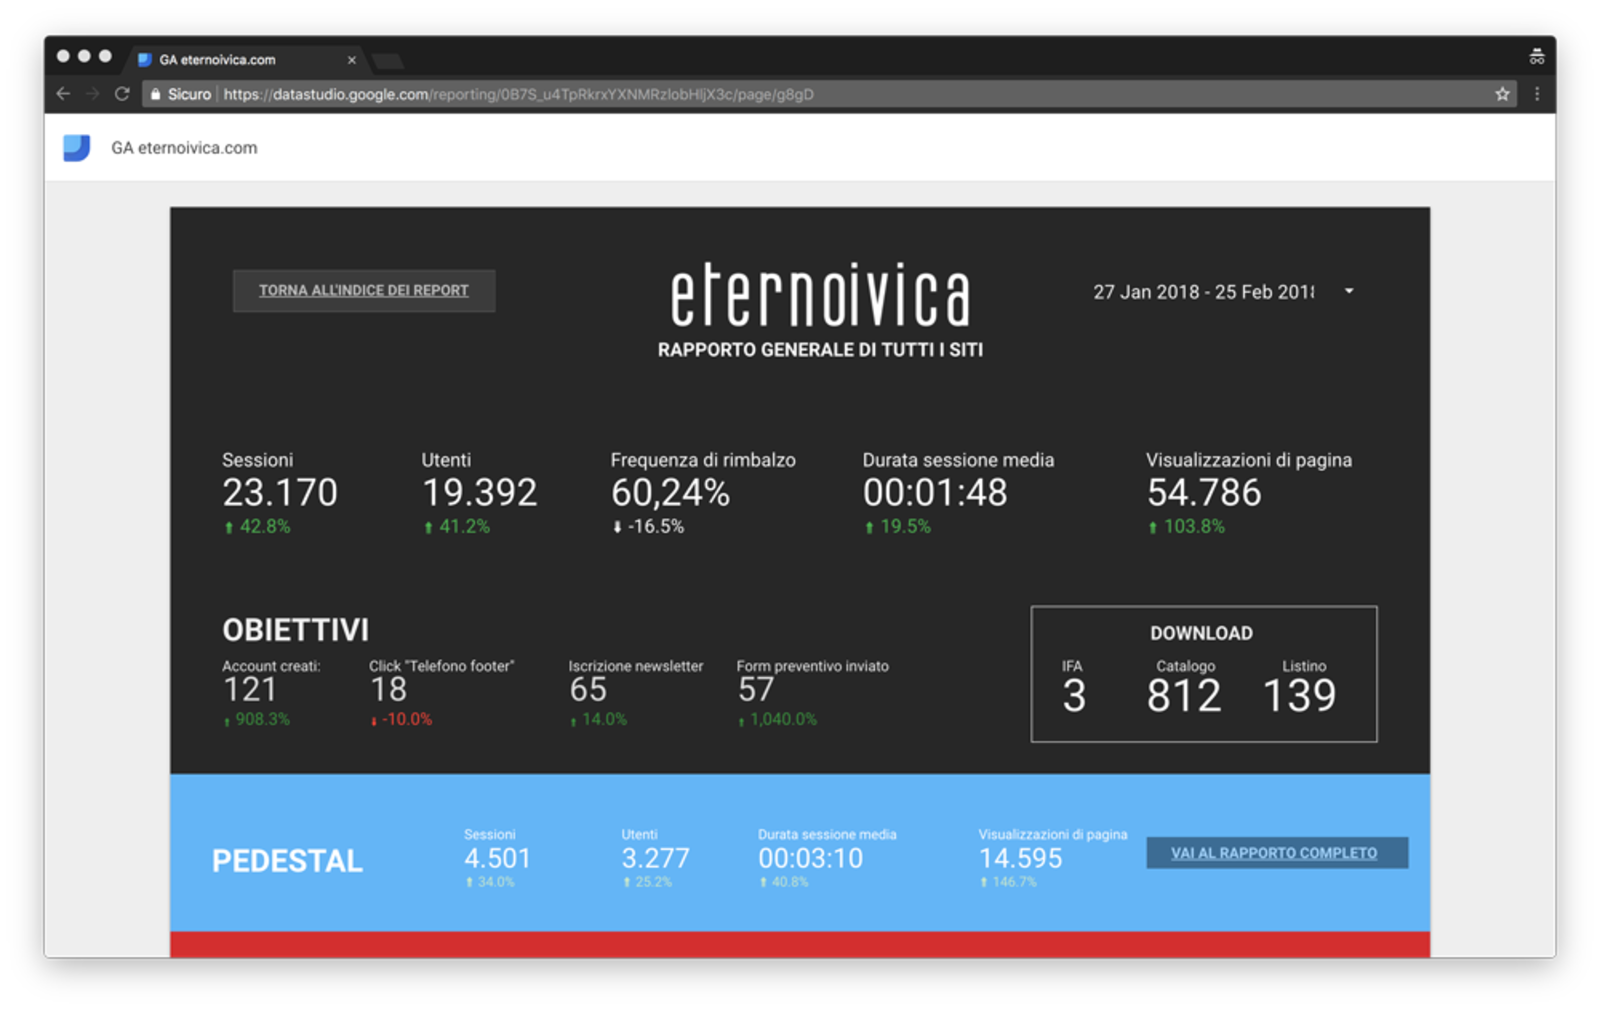 Screenshot of the management page showing the report statistics of the Eterno Ivica site